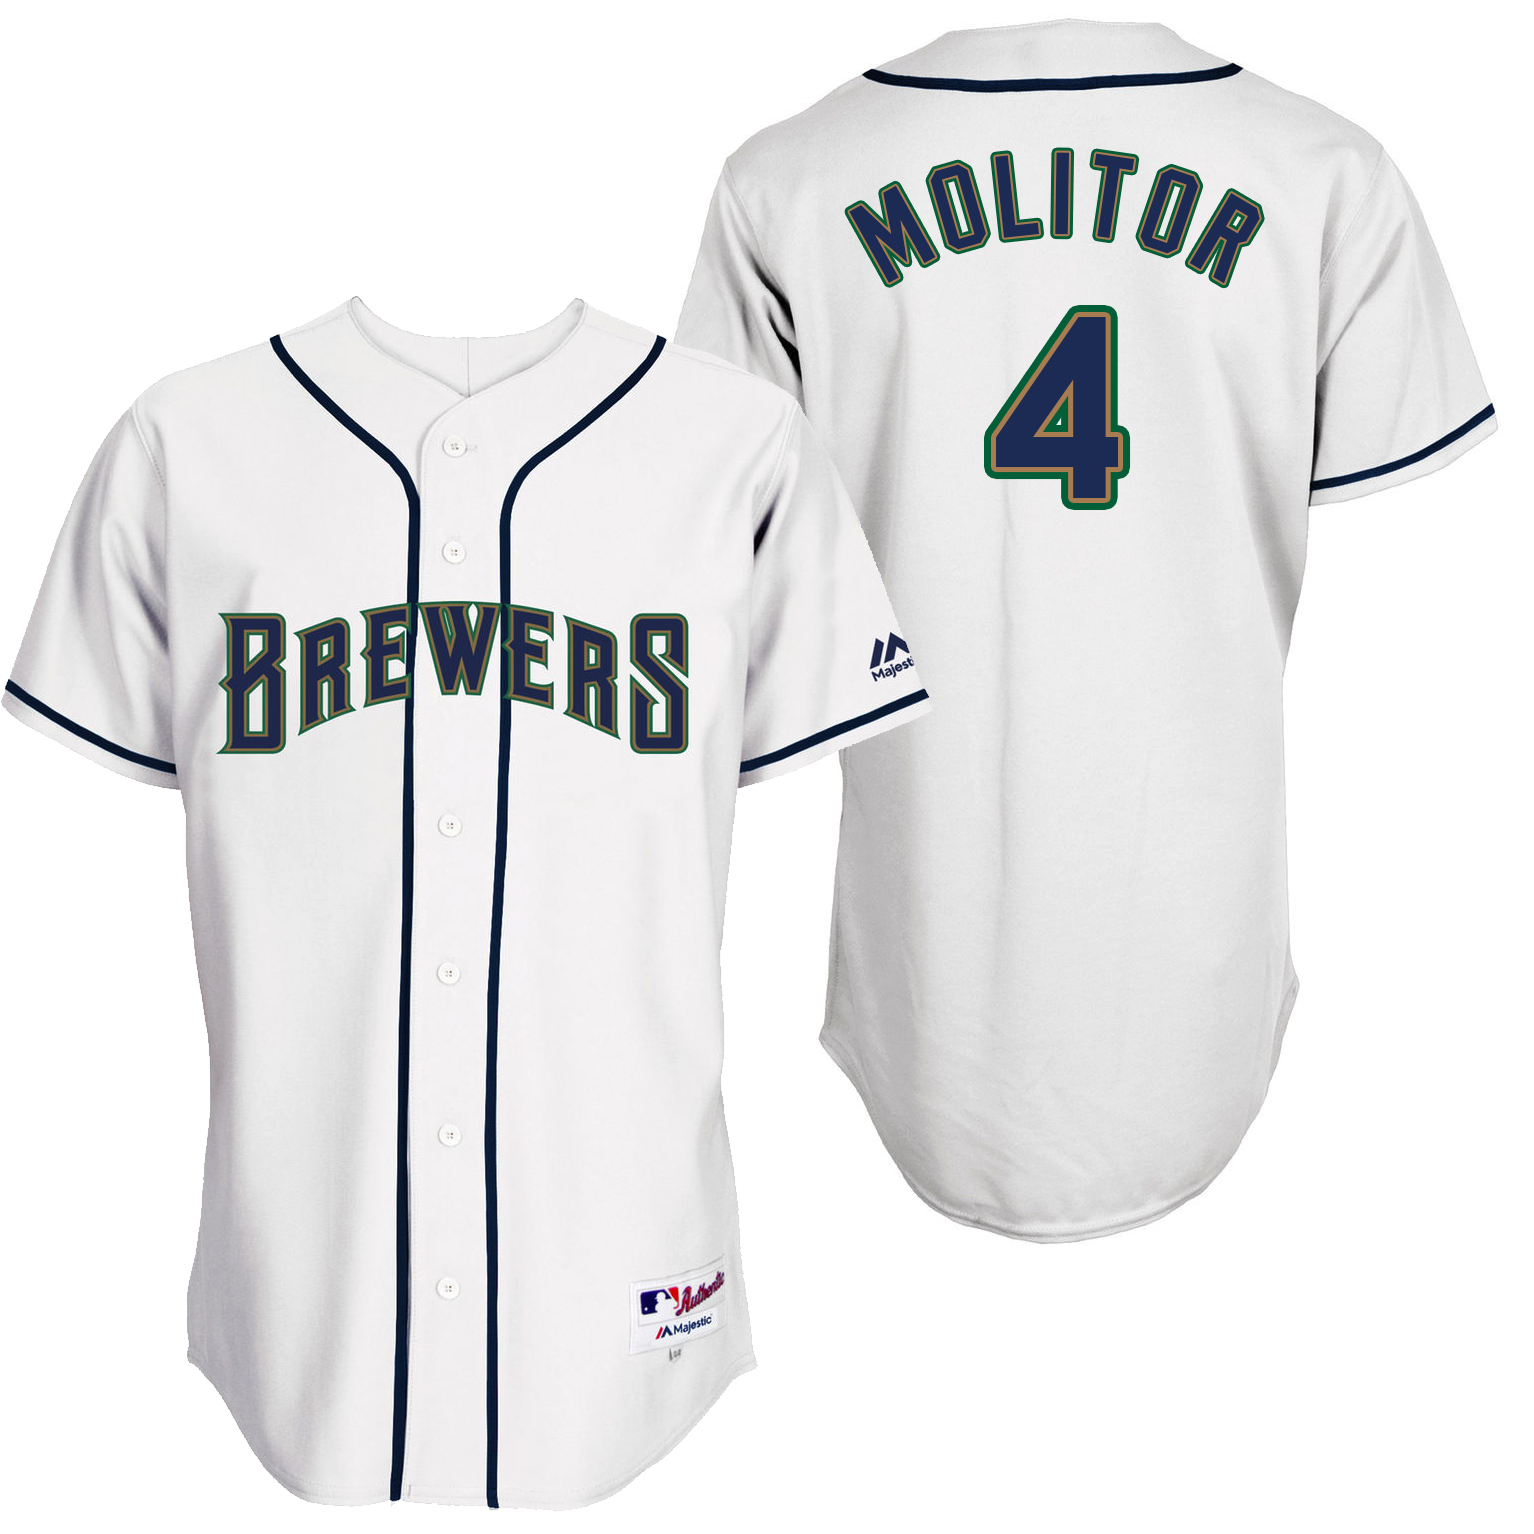 Brewers 4 Paul Molitor White Throwback Jersey